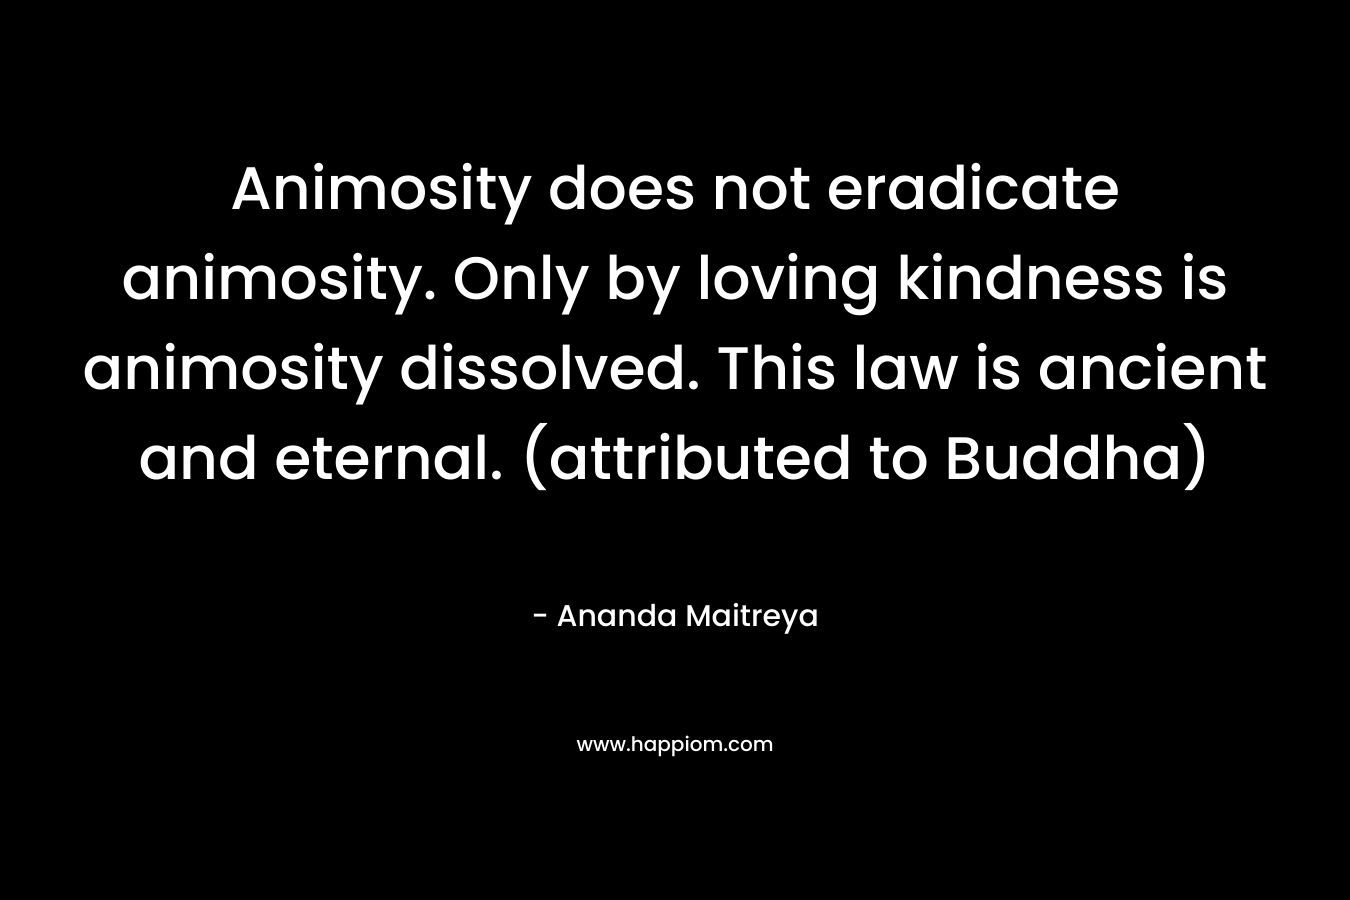 Animosity does not eradicate animosity. Only by loving kindness is animosity dissolved. This law is ancient and eternal. (attributed to Buddha)